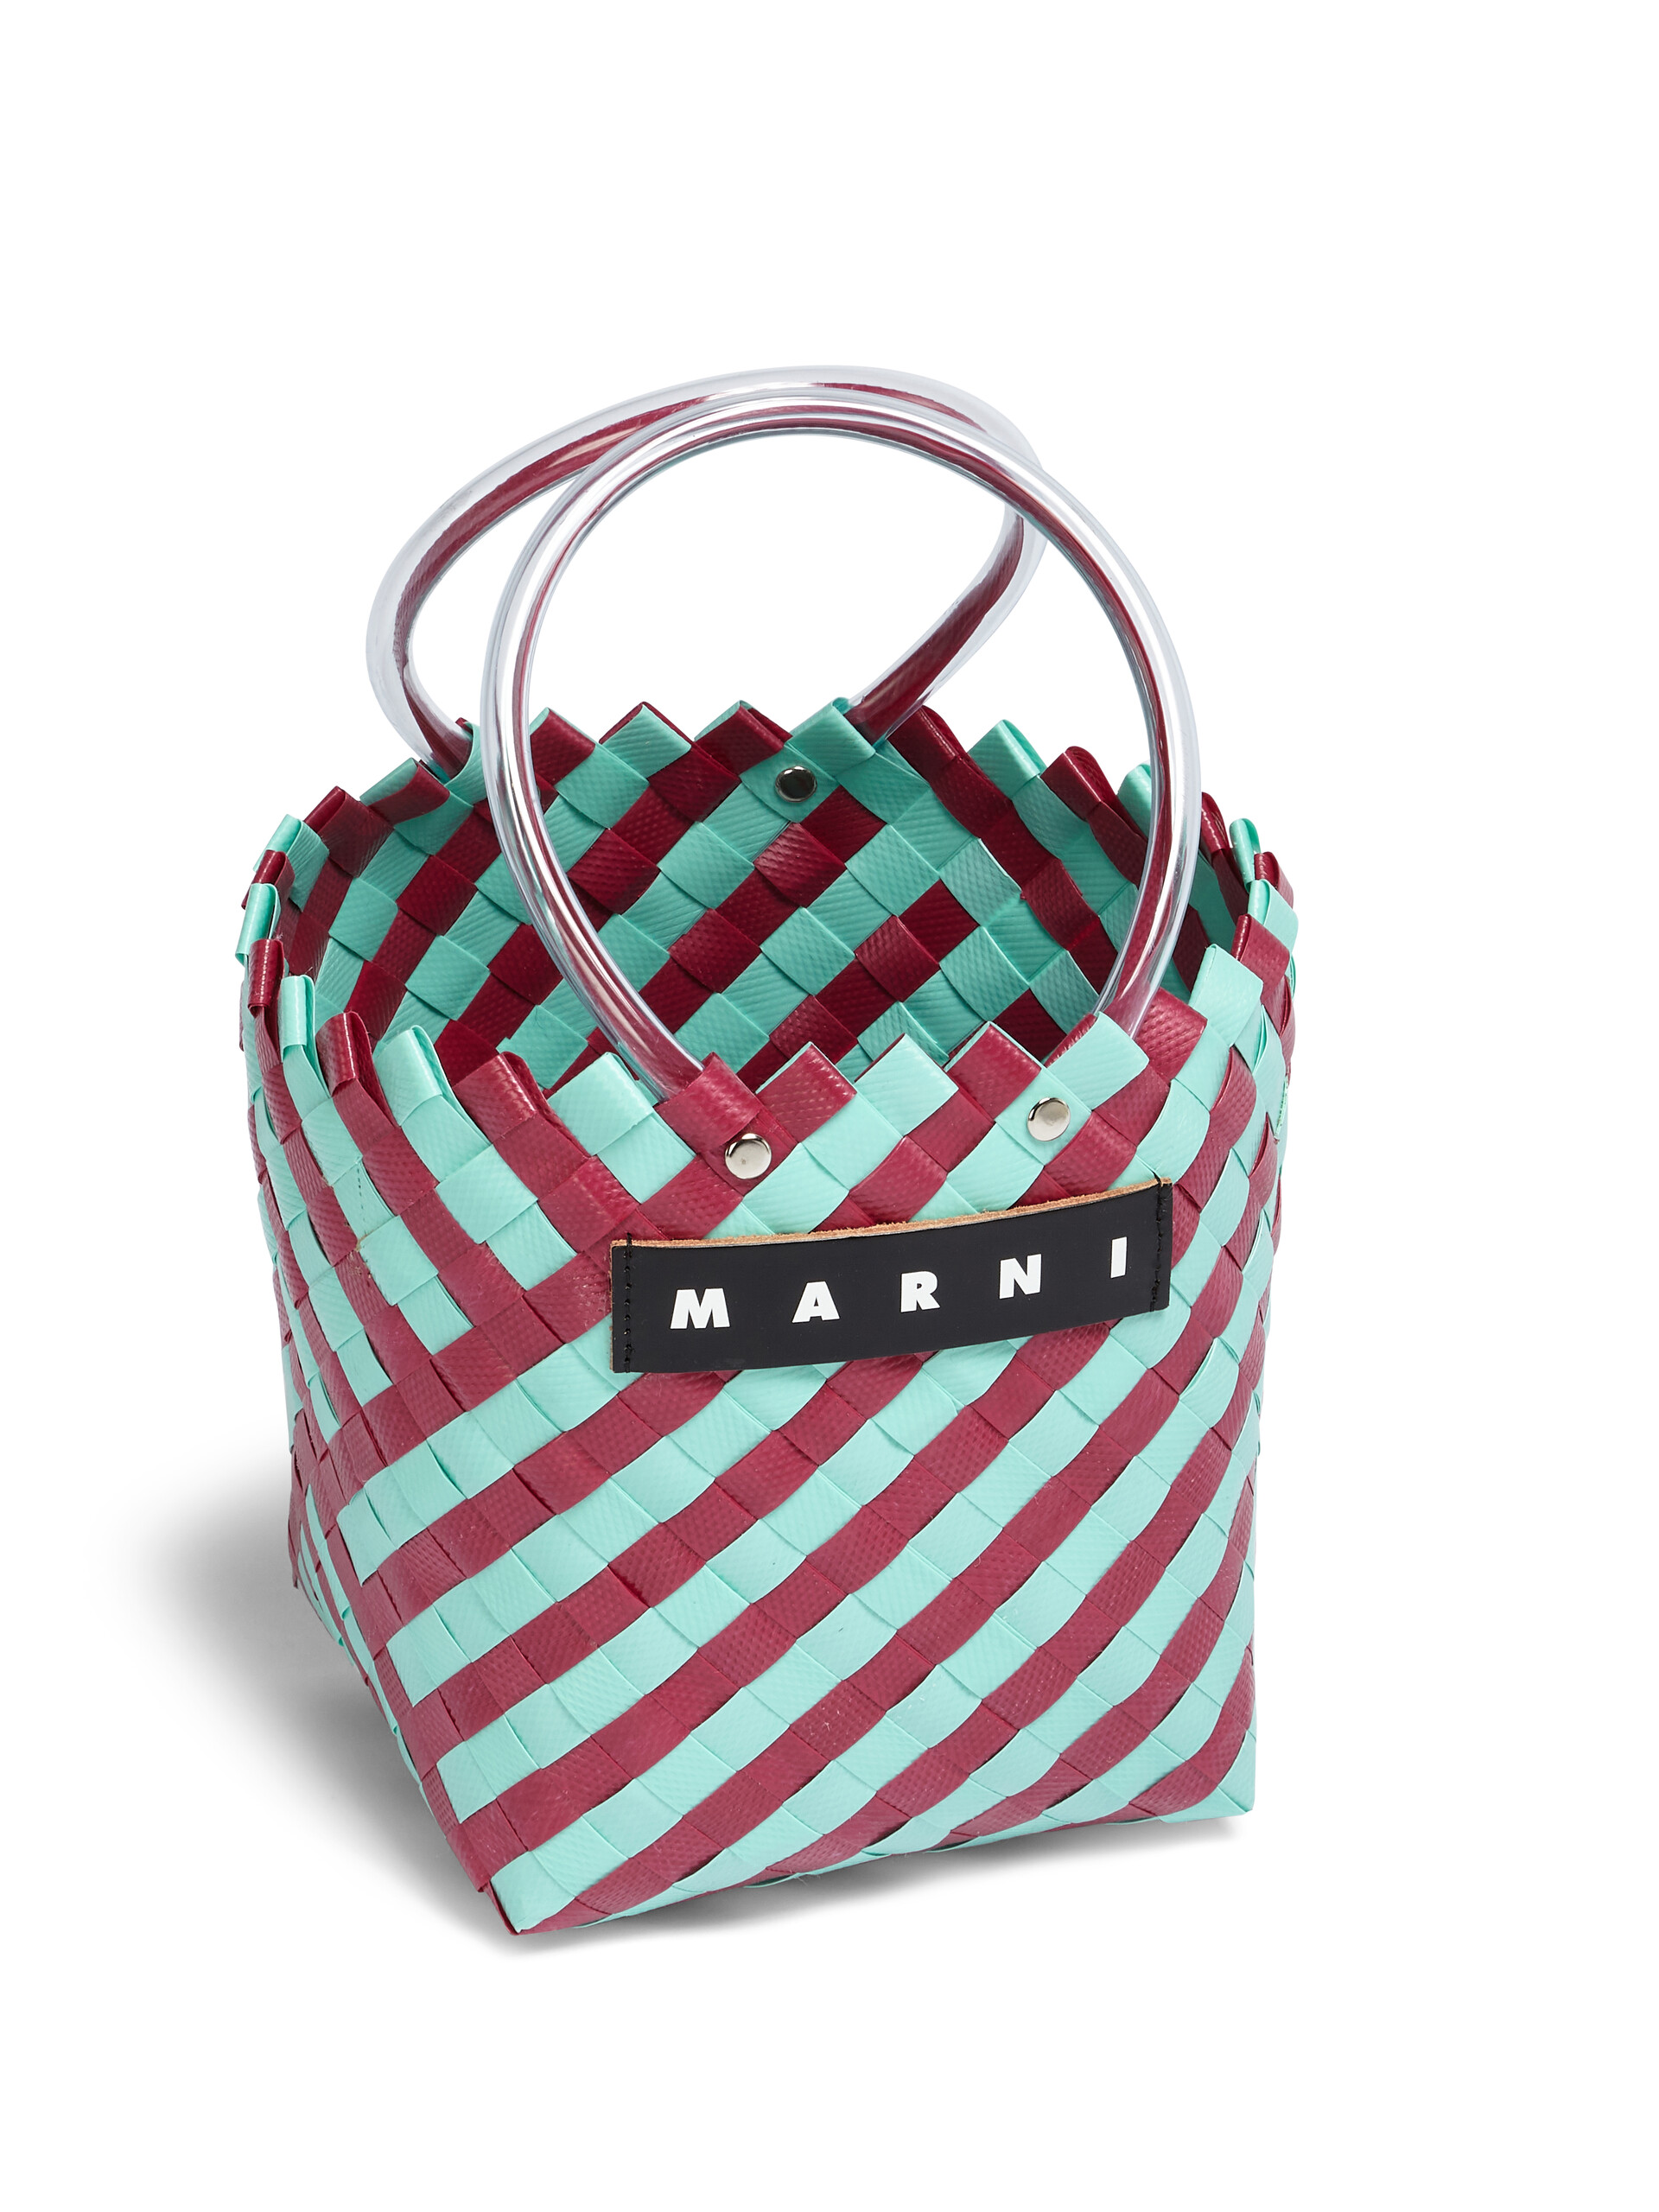 MARNI MARKET TAHA bag in green and burgundy woven material - Bags - Image 4